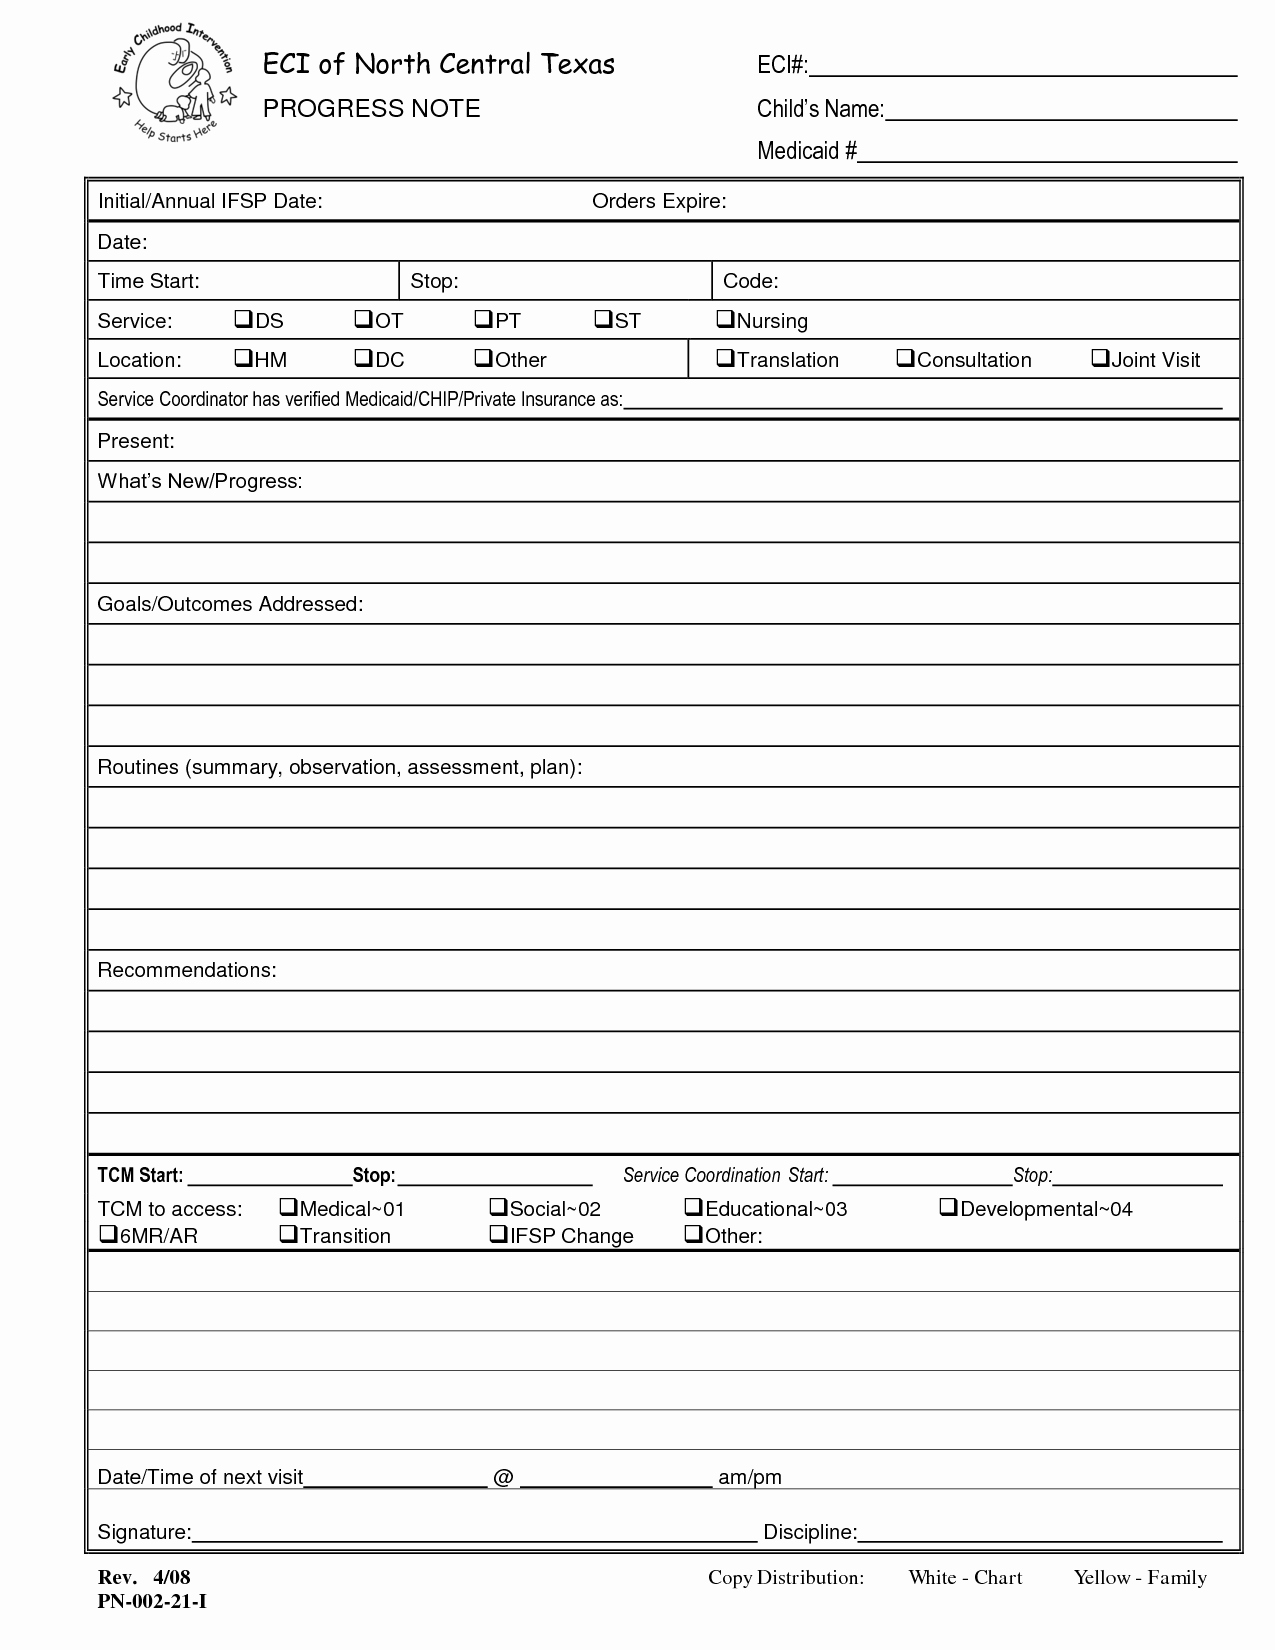 Case Management Notes Template Awesome Progress Note Template